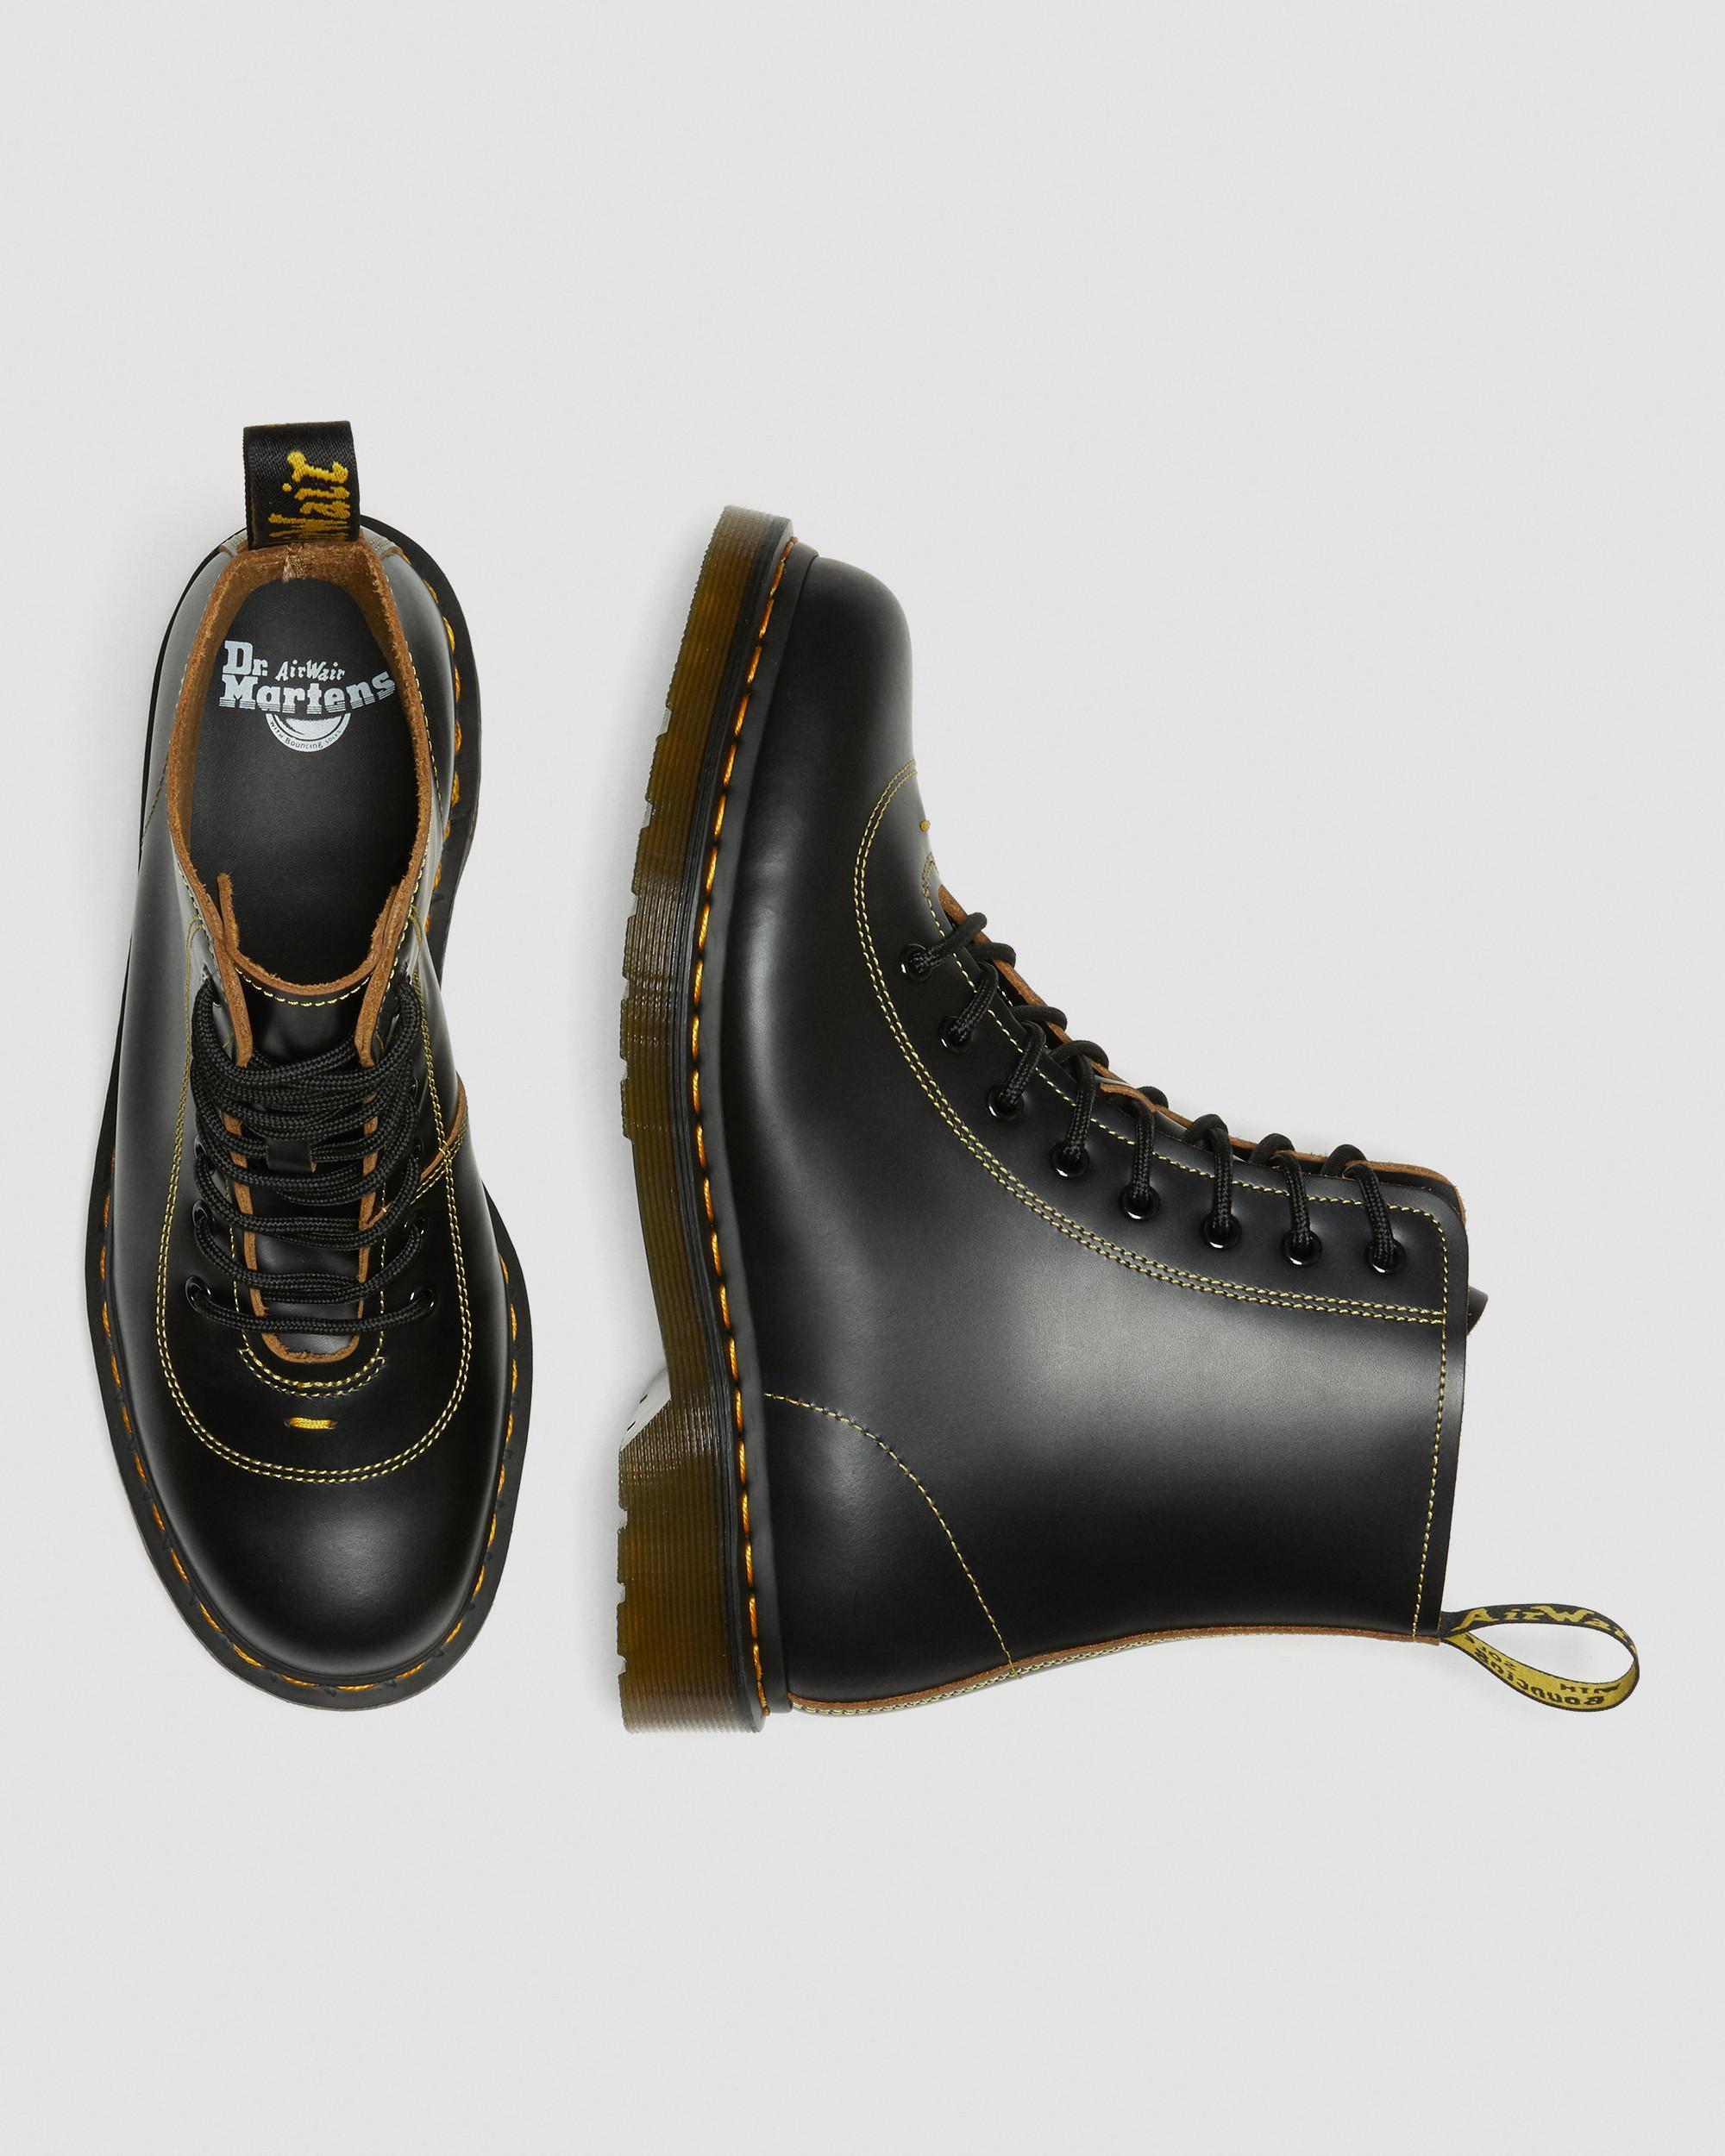 Dr. Martens Pharamond Vintage Smooth Leather Ankle Boots in Black | Lyst